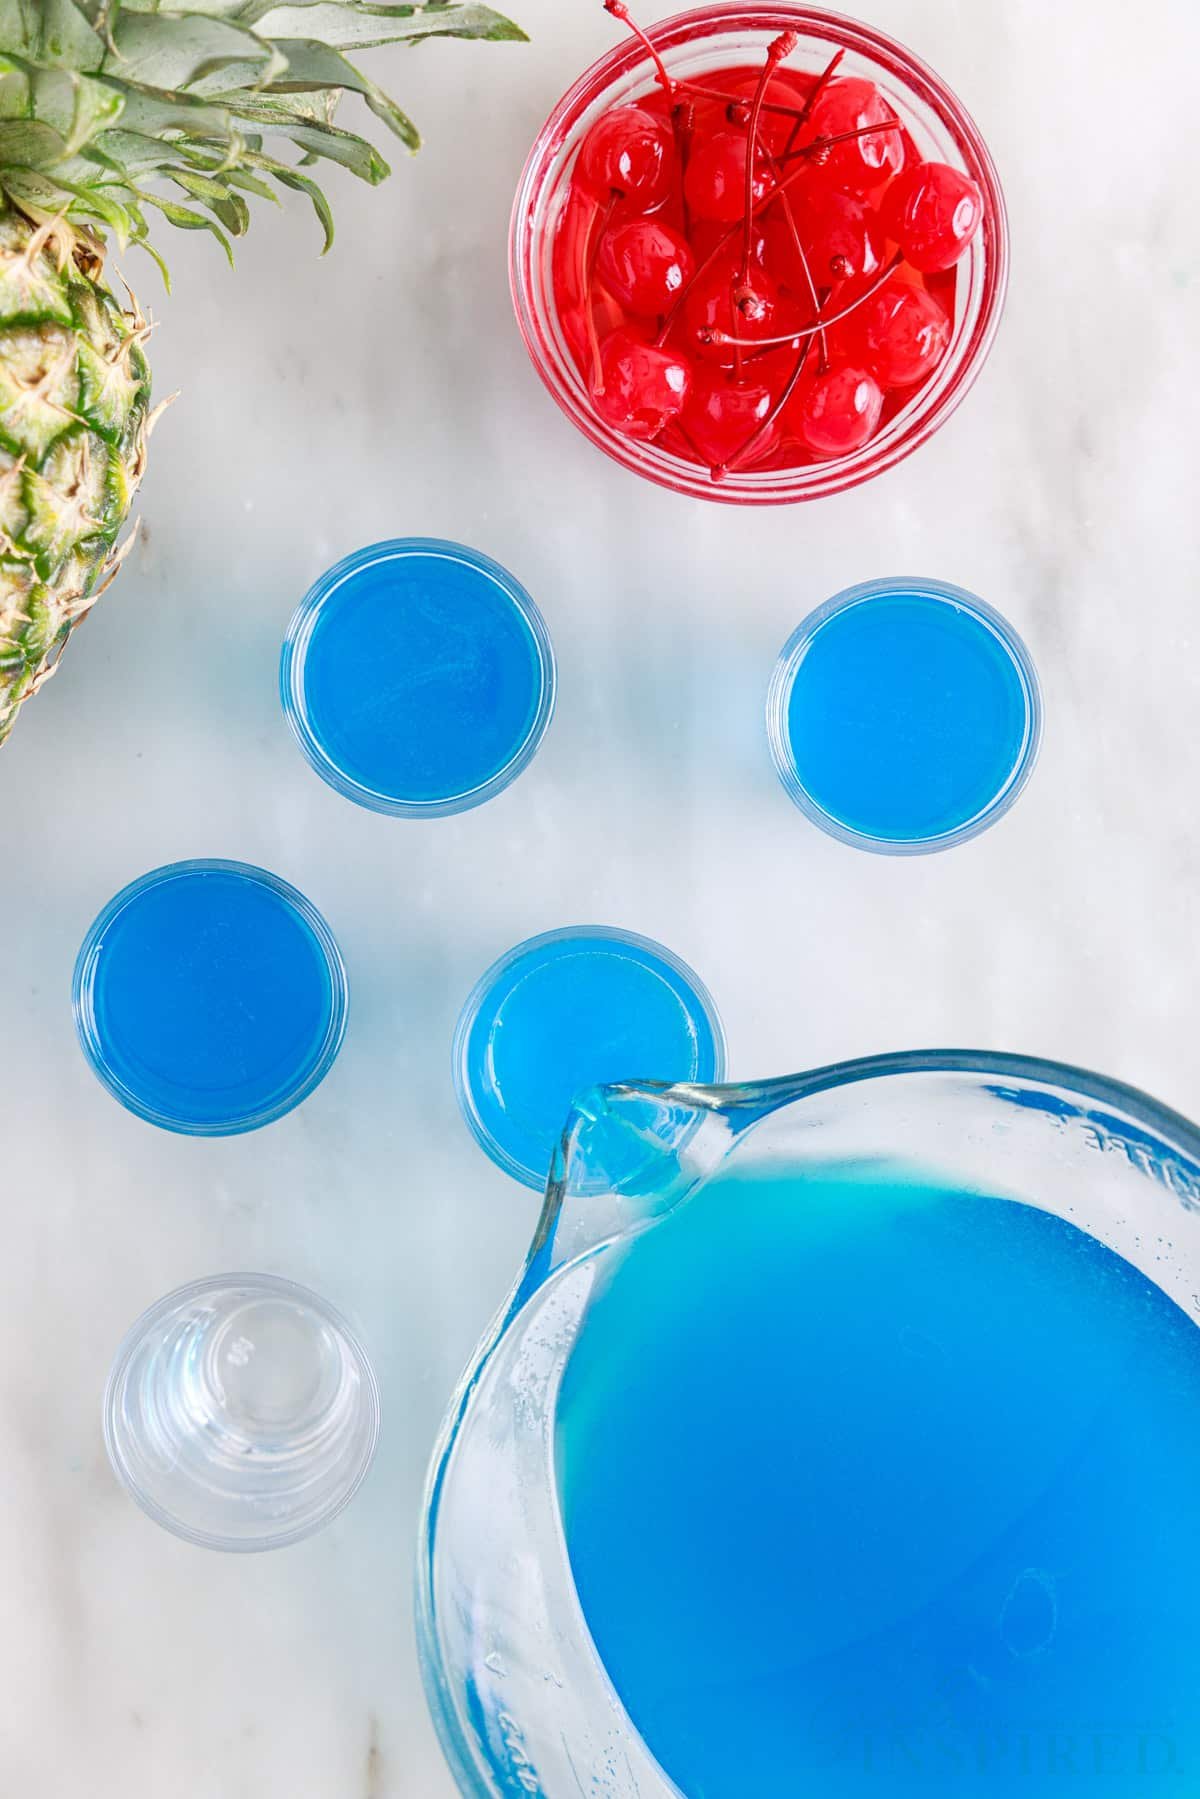 Blue Hawaiian Jello Shots being poured into shot glasses next to a dish of cherries.